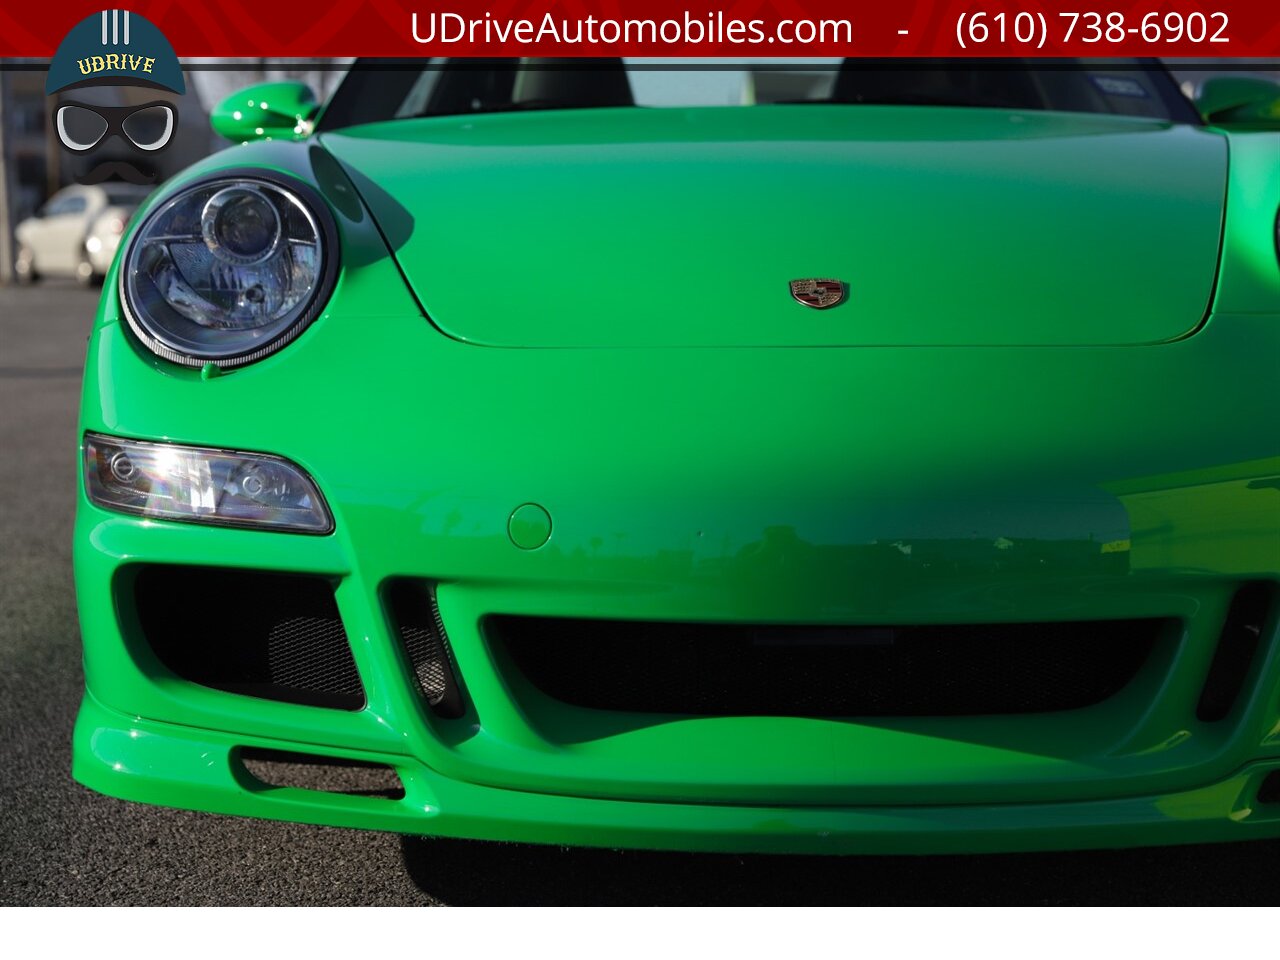 2008 Porsche 911 S 997 6Sp PTS RS Green AeroKit 1of a Kind  $118k MSRP Champion F77 Pkg RG5 Whls - Photo 15 - West Chester, PA 19382